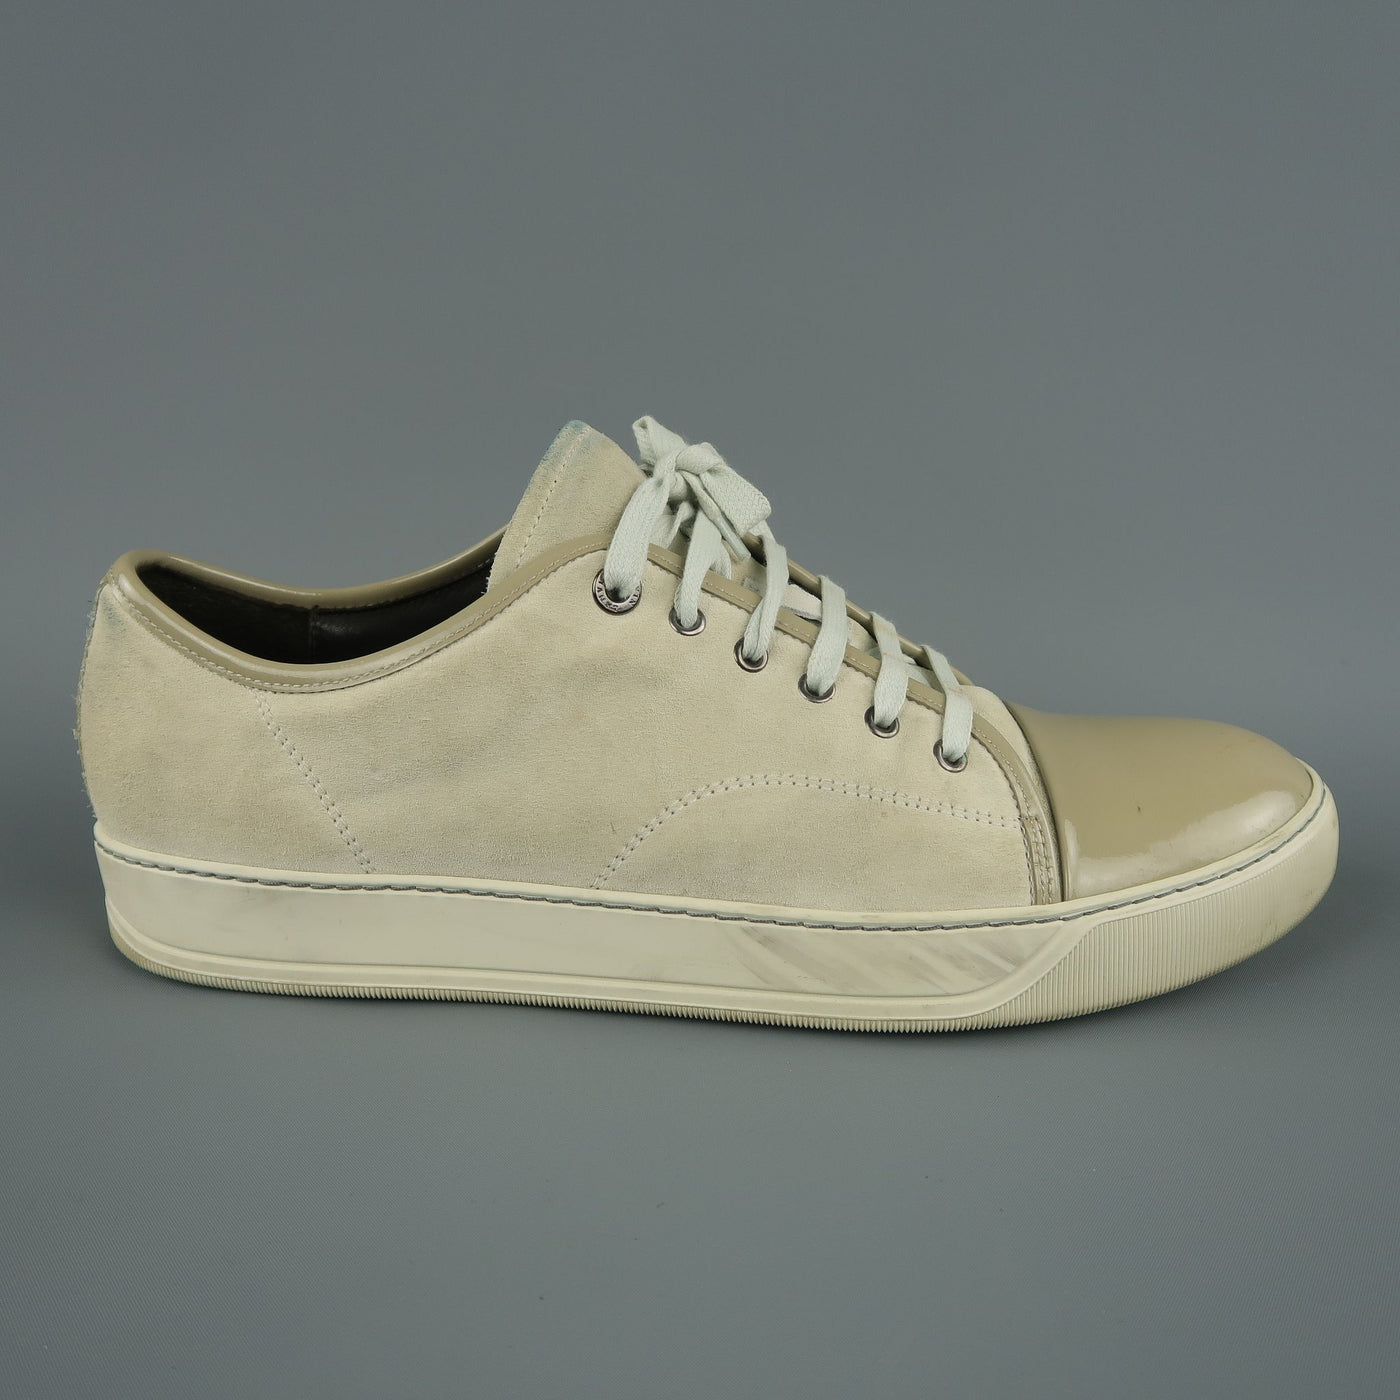 LANVIN Size 13 Ivory Solid Suede Lace Up Sneakers